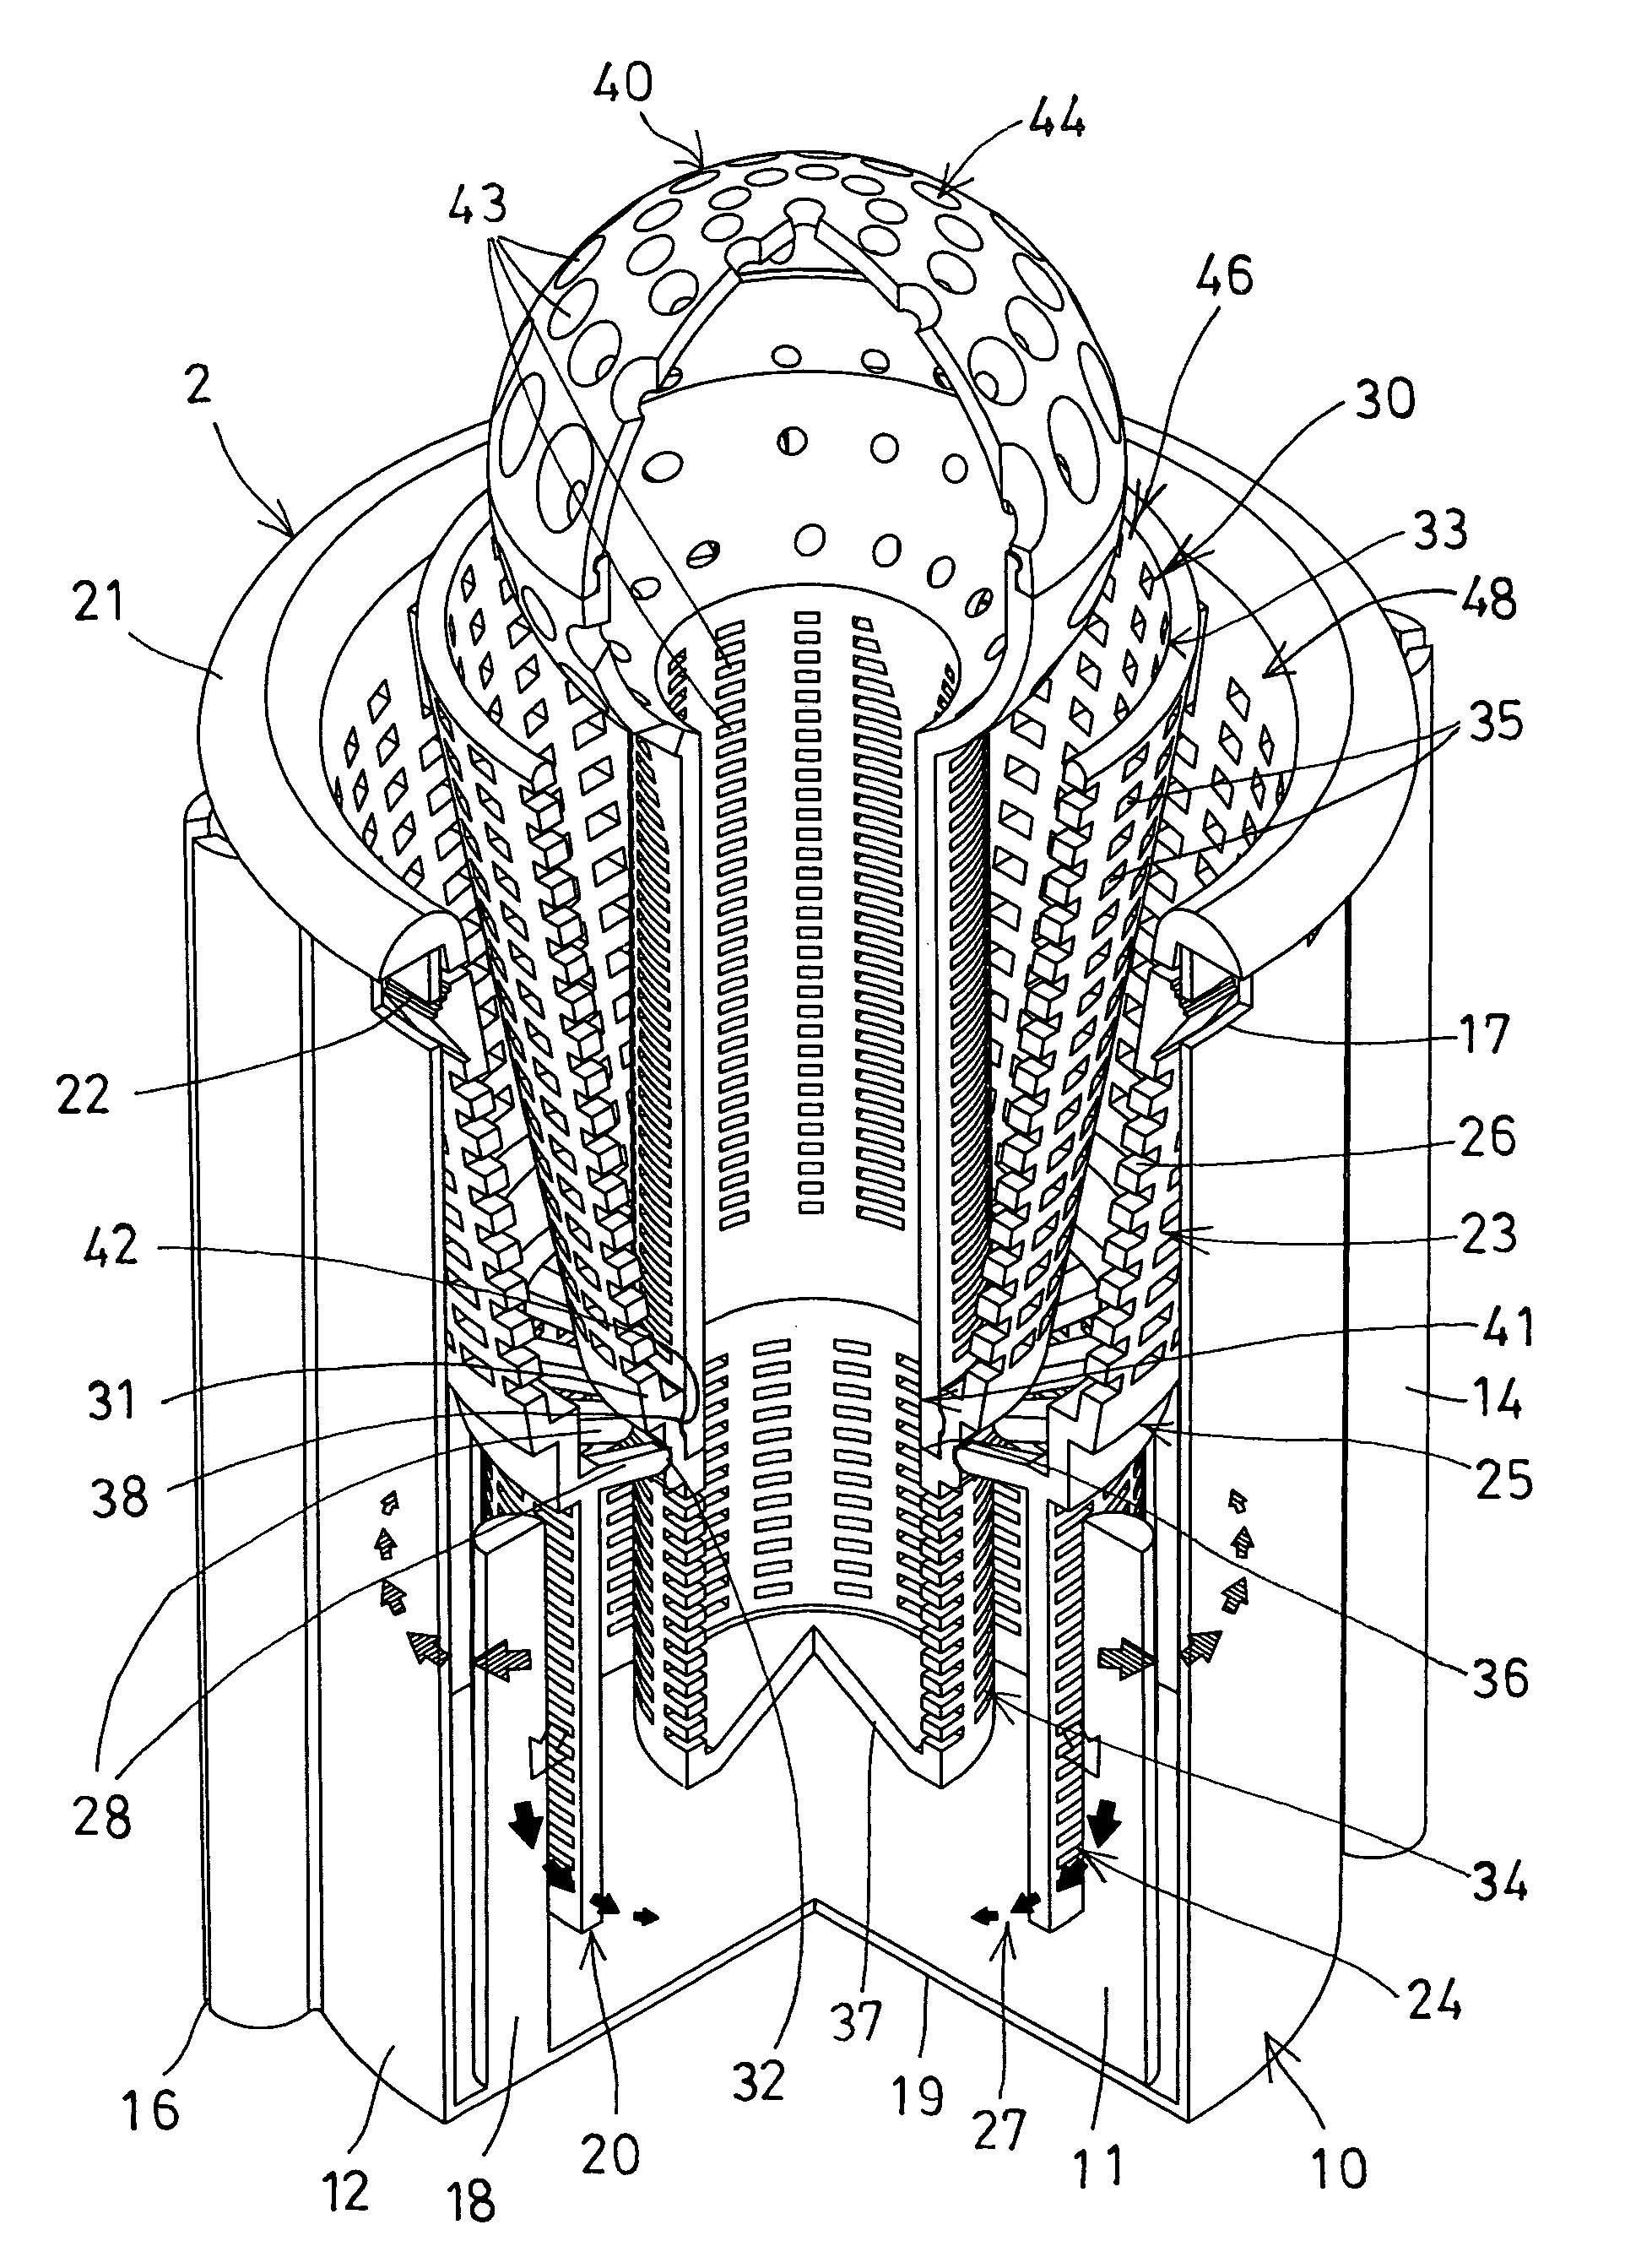 Acoustic absorbing device